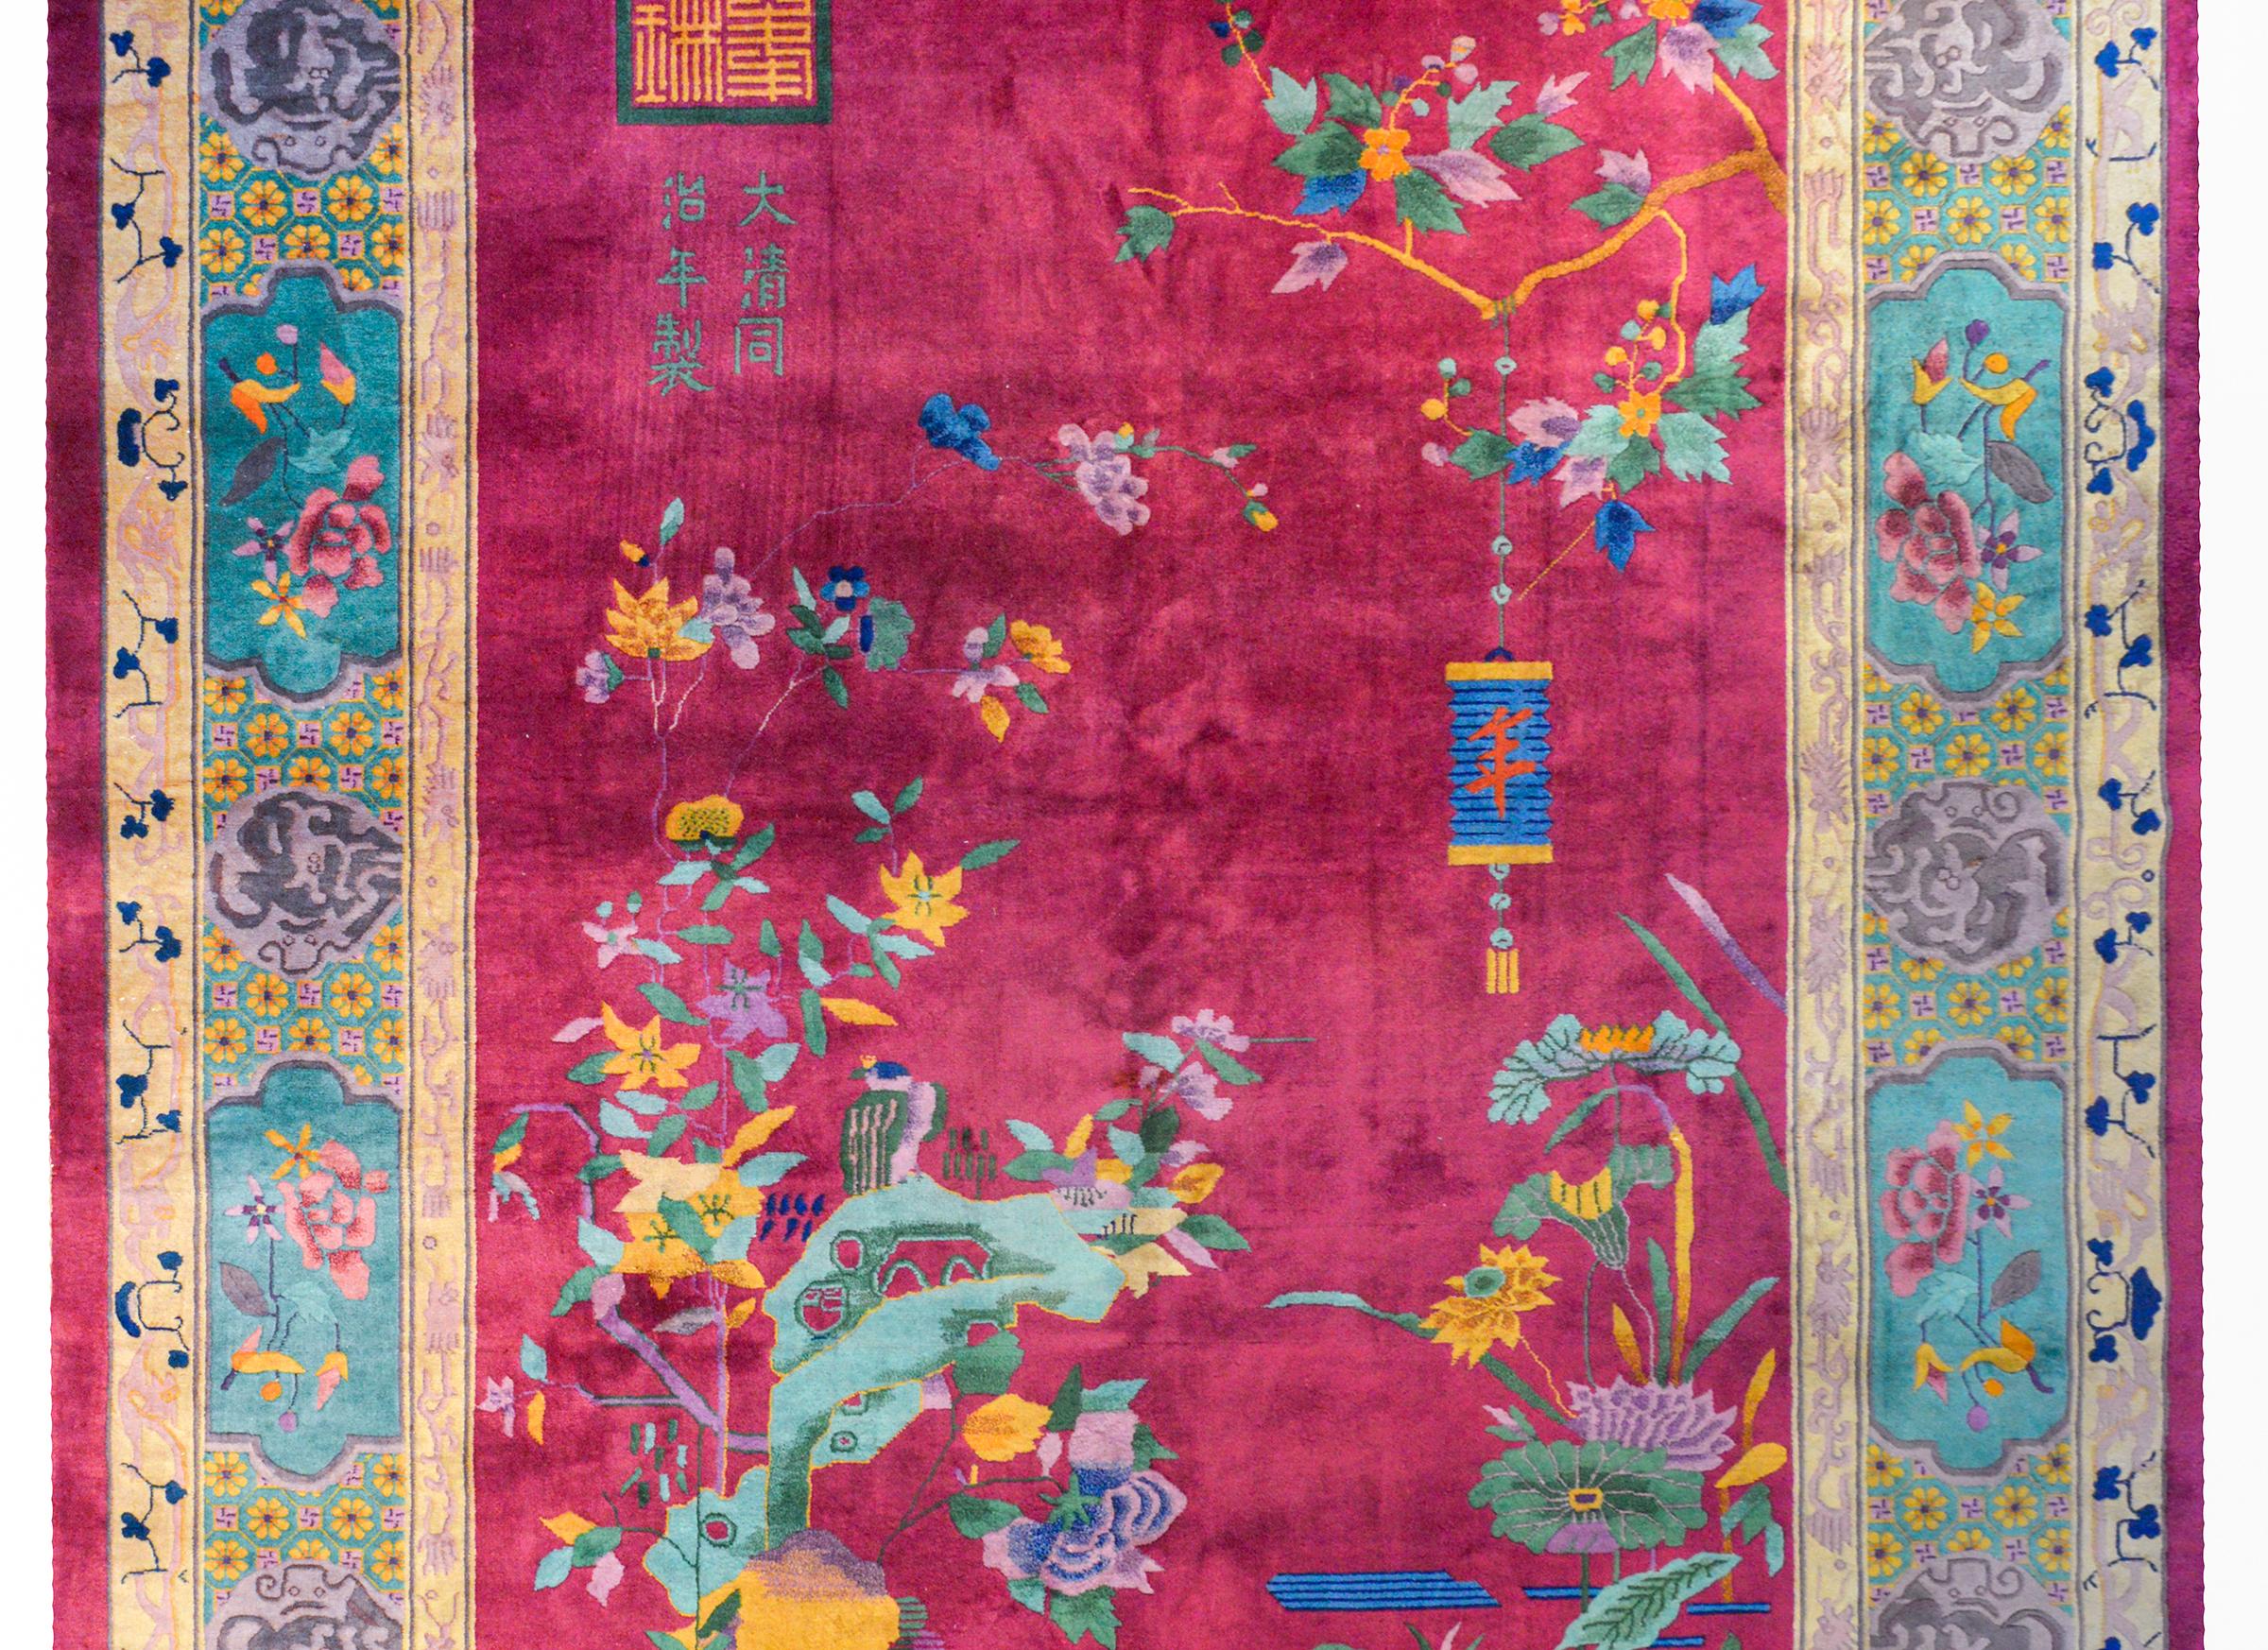 A whimsical early 20th century Chinese Art Deco rug with a peaceful garden landscape depicting a flowering tree branch with a lantern hanging over the corner of a pond with blossoming lotus and scholar's rocks, all on a bright cranberry background